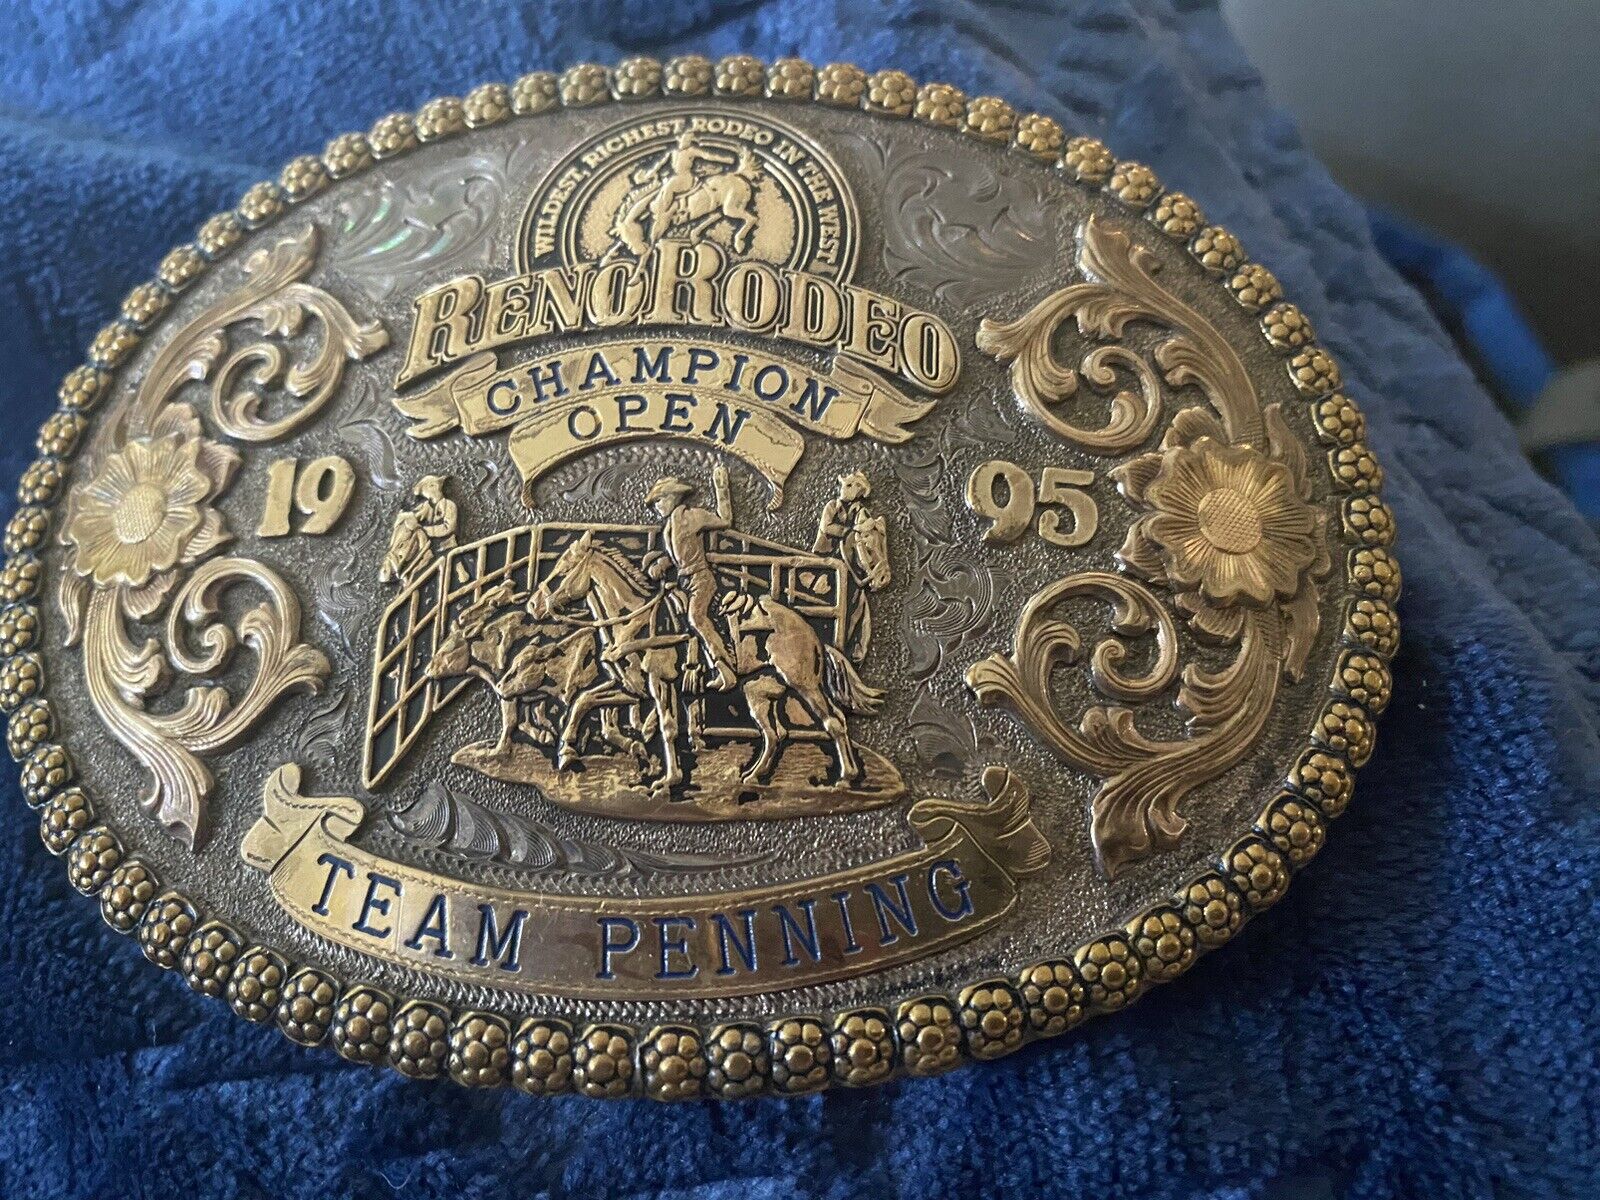 1995 Skyline Reno Rodeo Sterling Filled Team Penning Champion Buckle